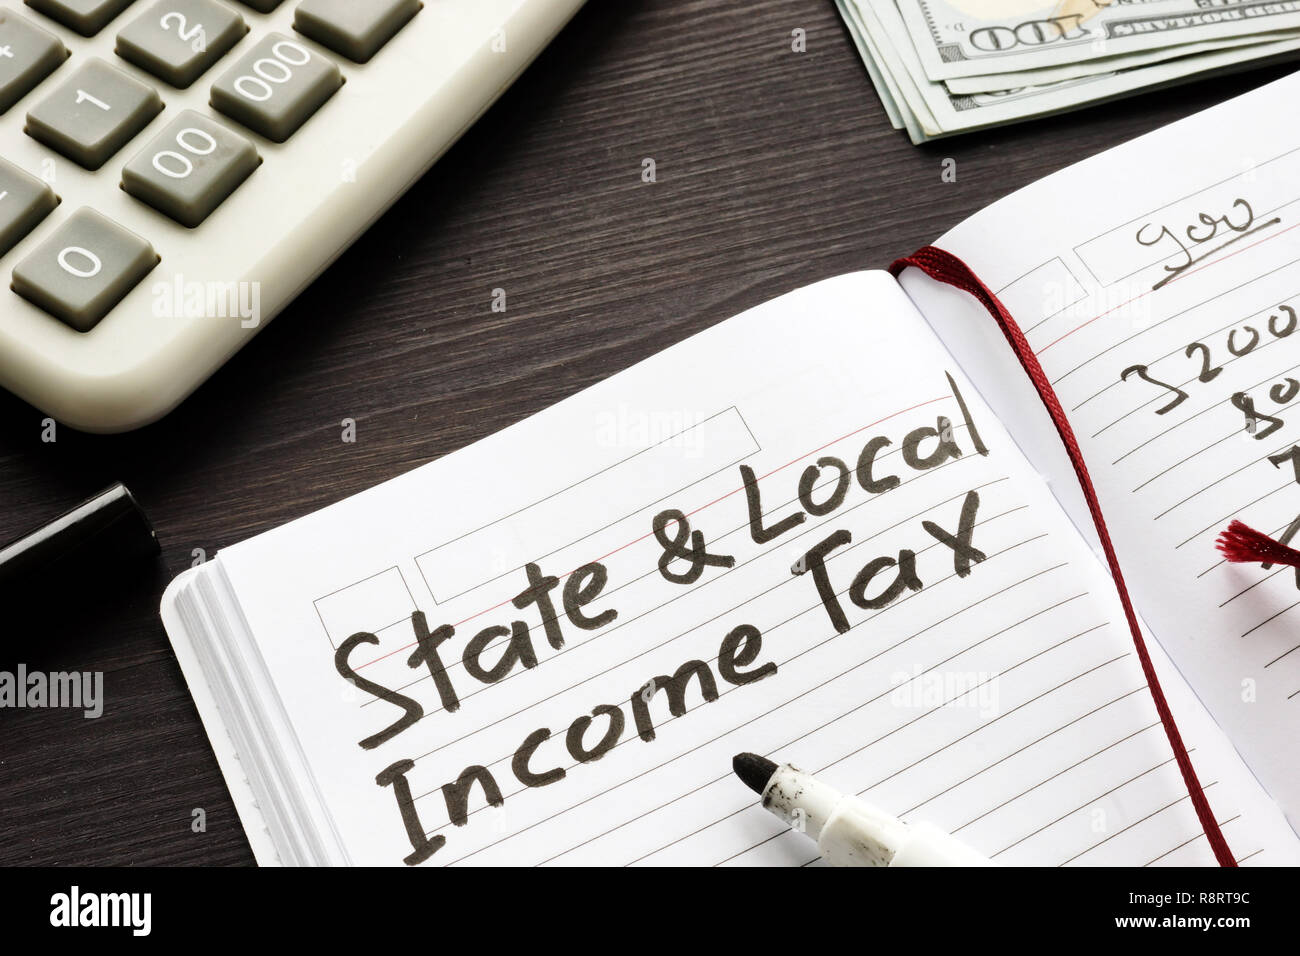 State and local income tax written in a note. Stock Photo